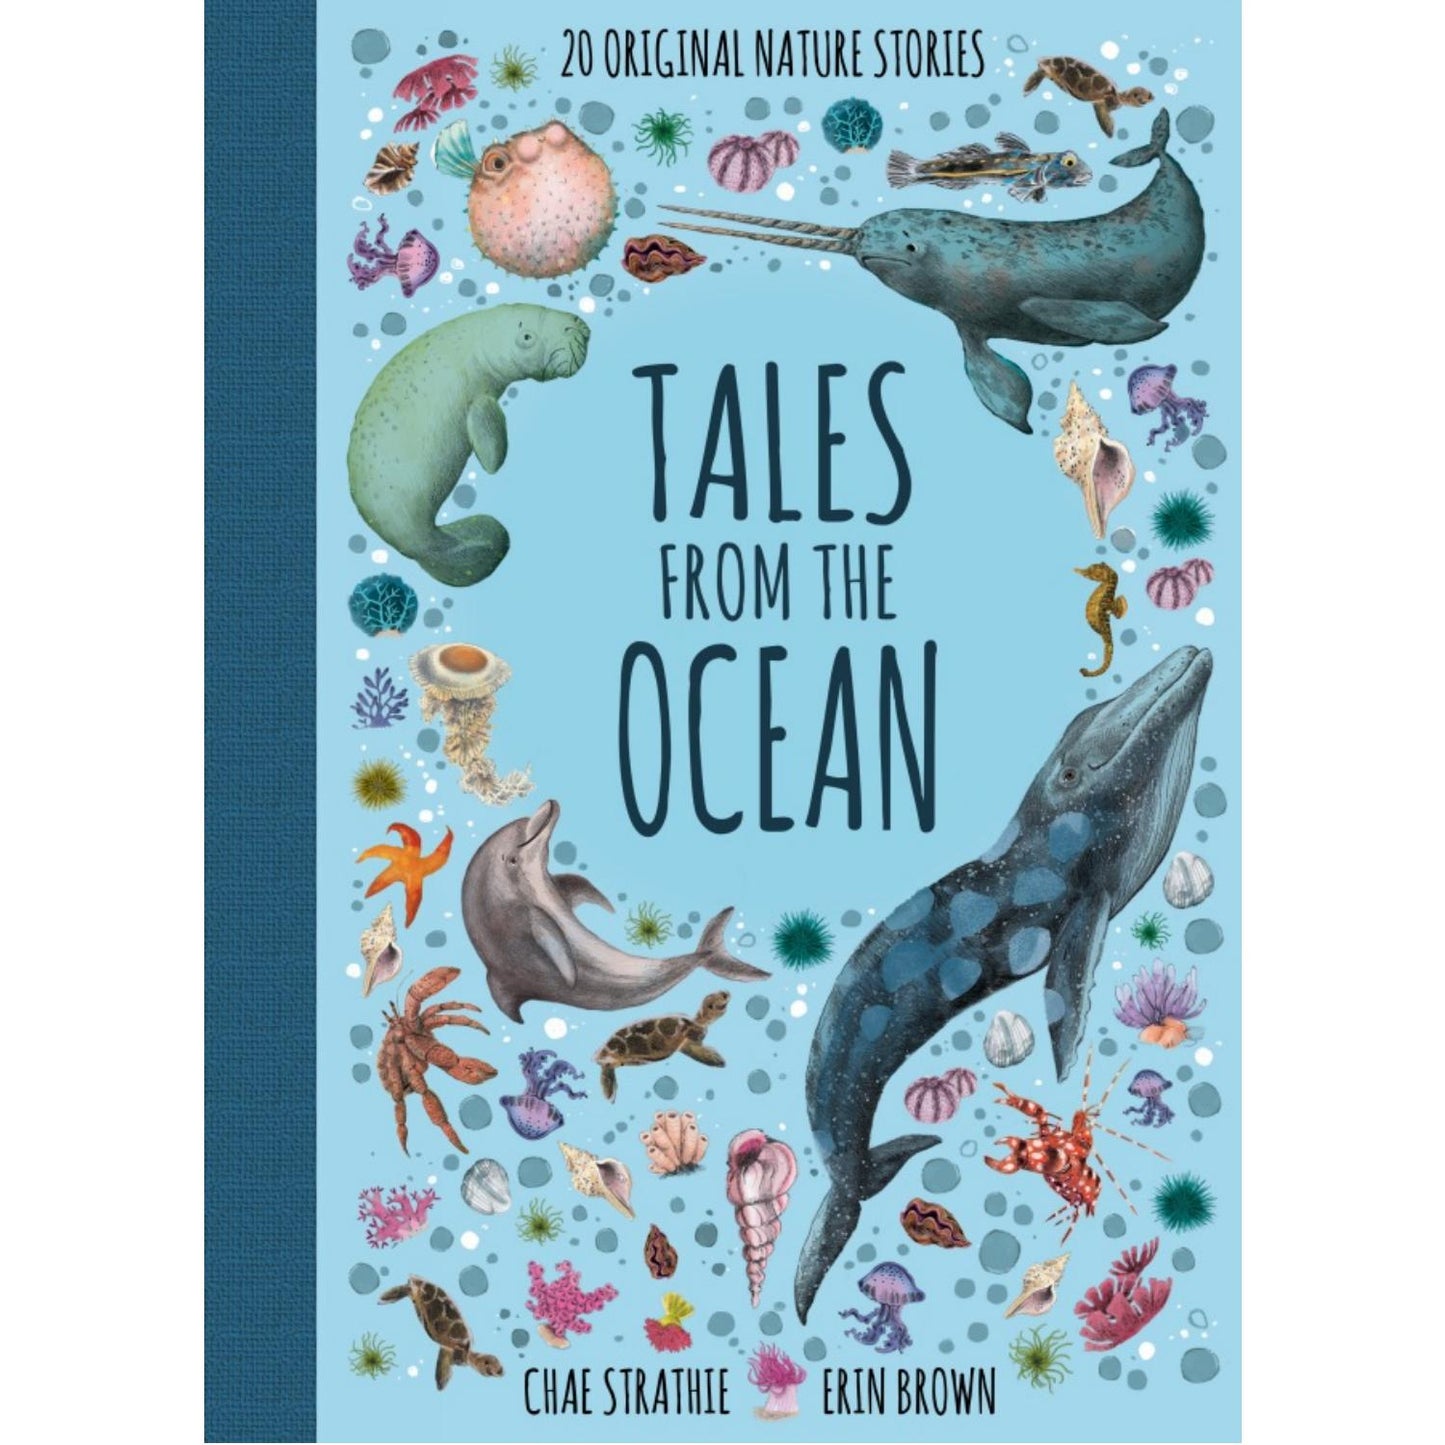 Tales From the Ocean | Hardcover | Children’s Book on Oceans & Seas